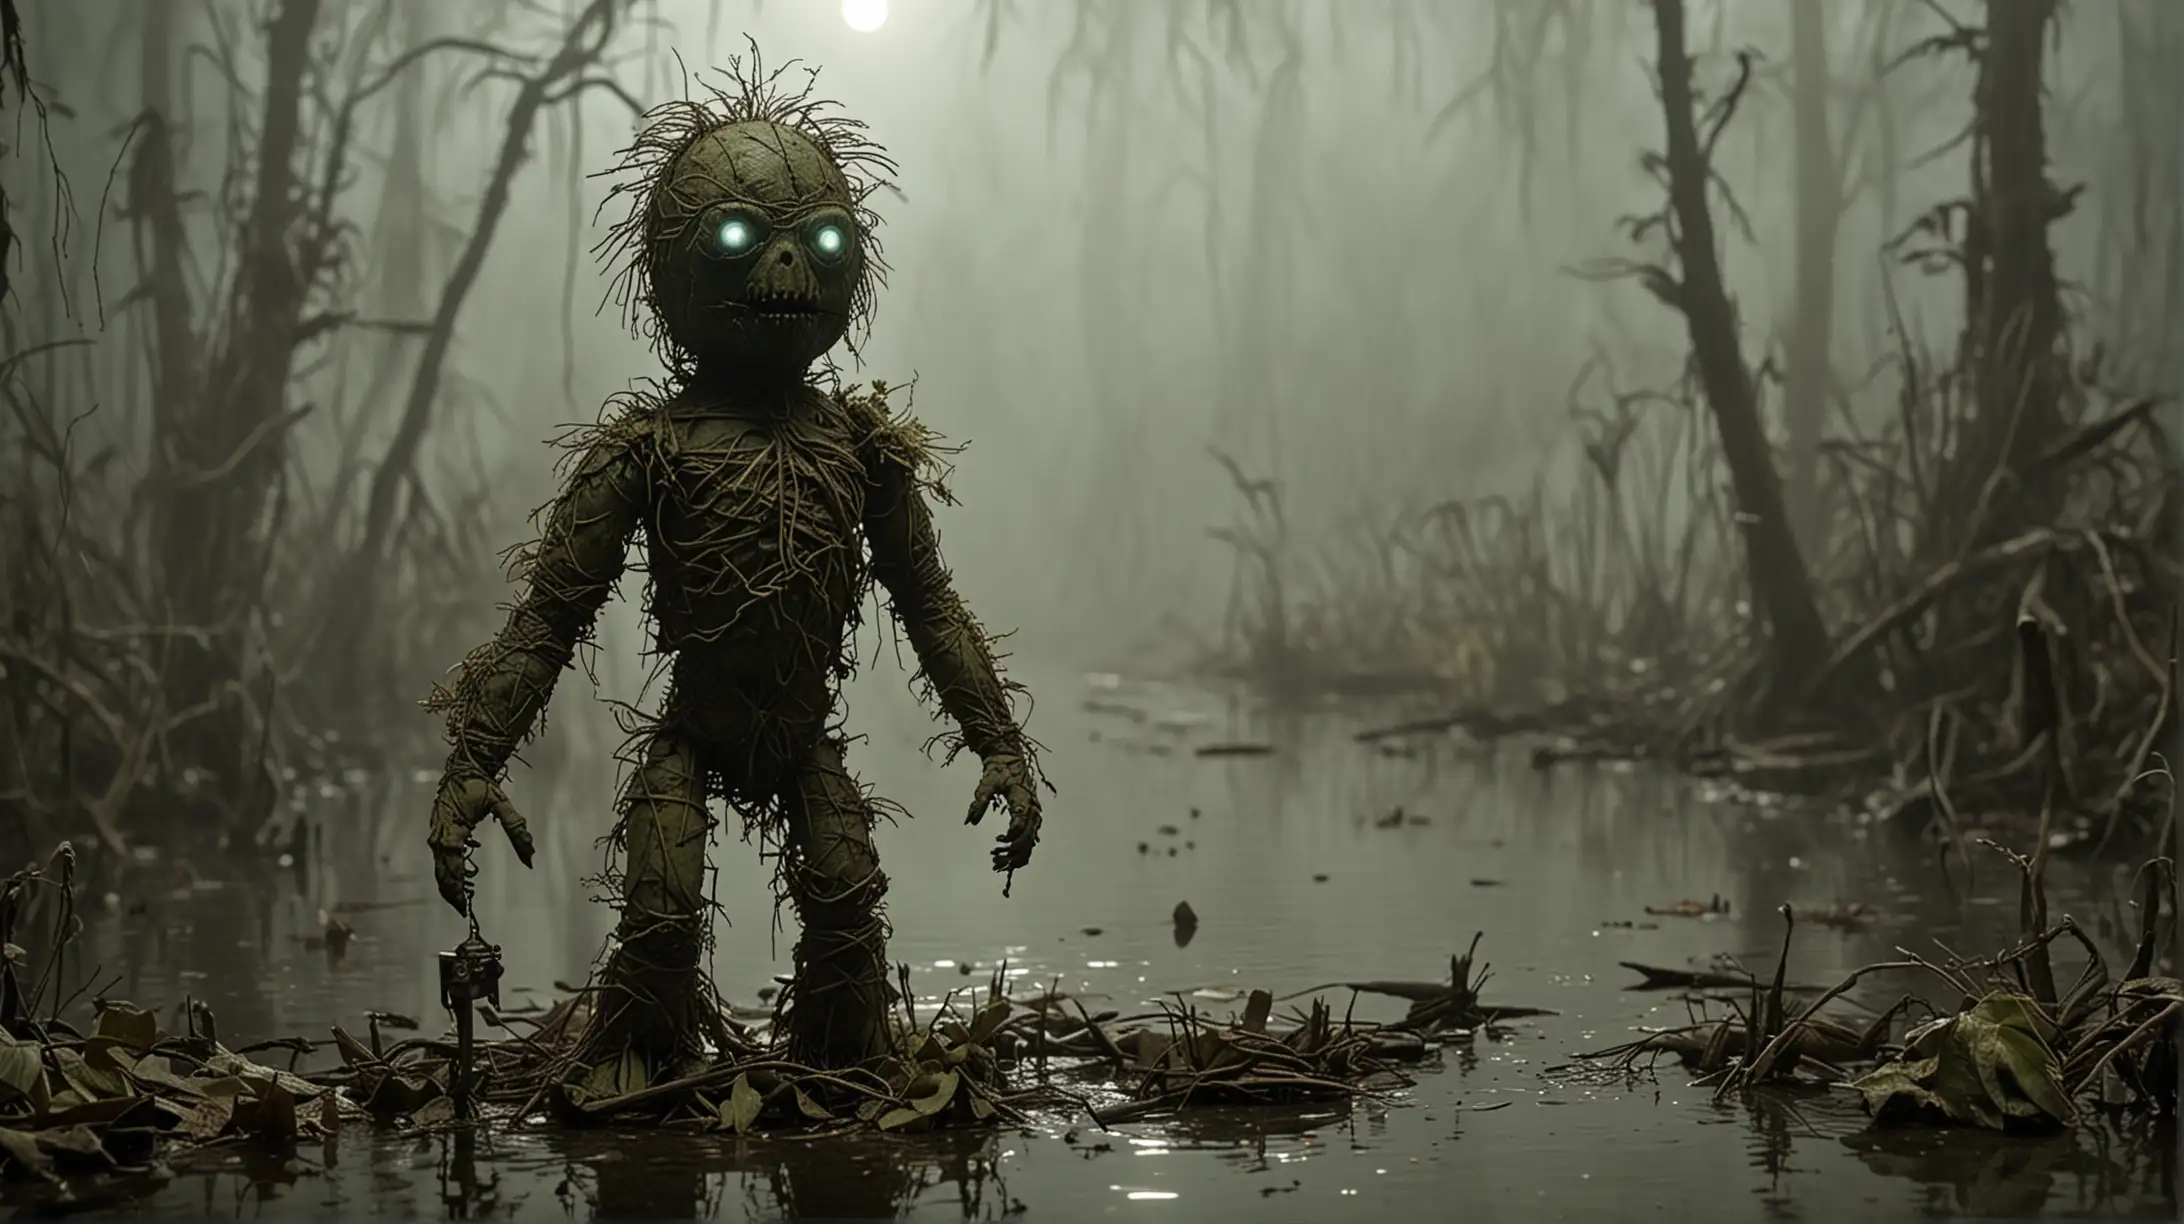 Voodoo Doll Swamp Thing in Louisiana Swamps at Night